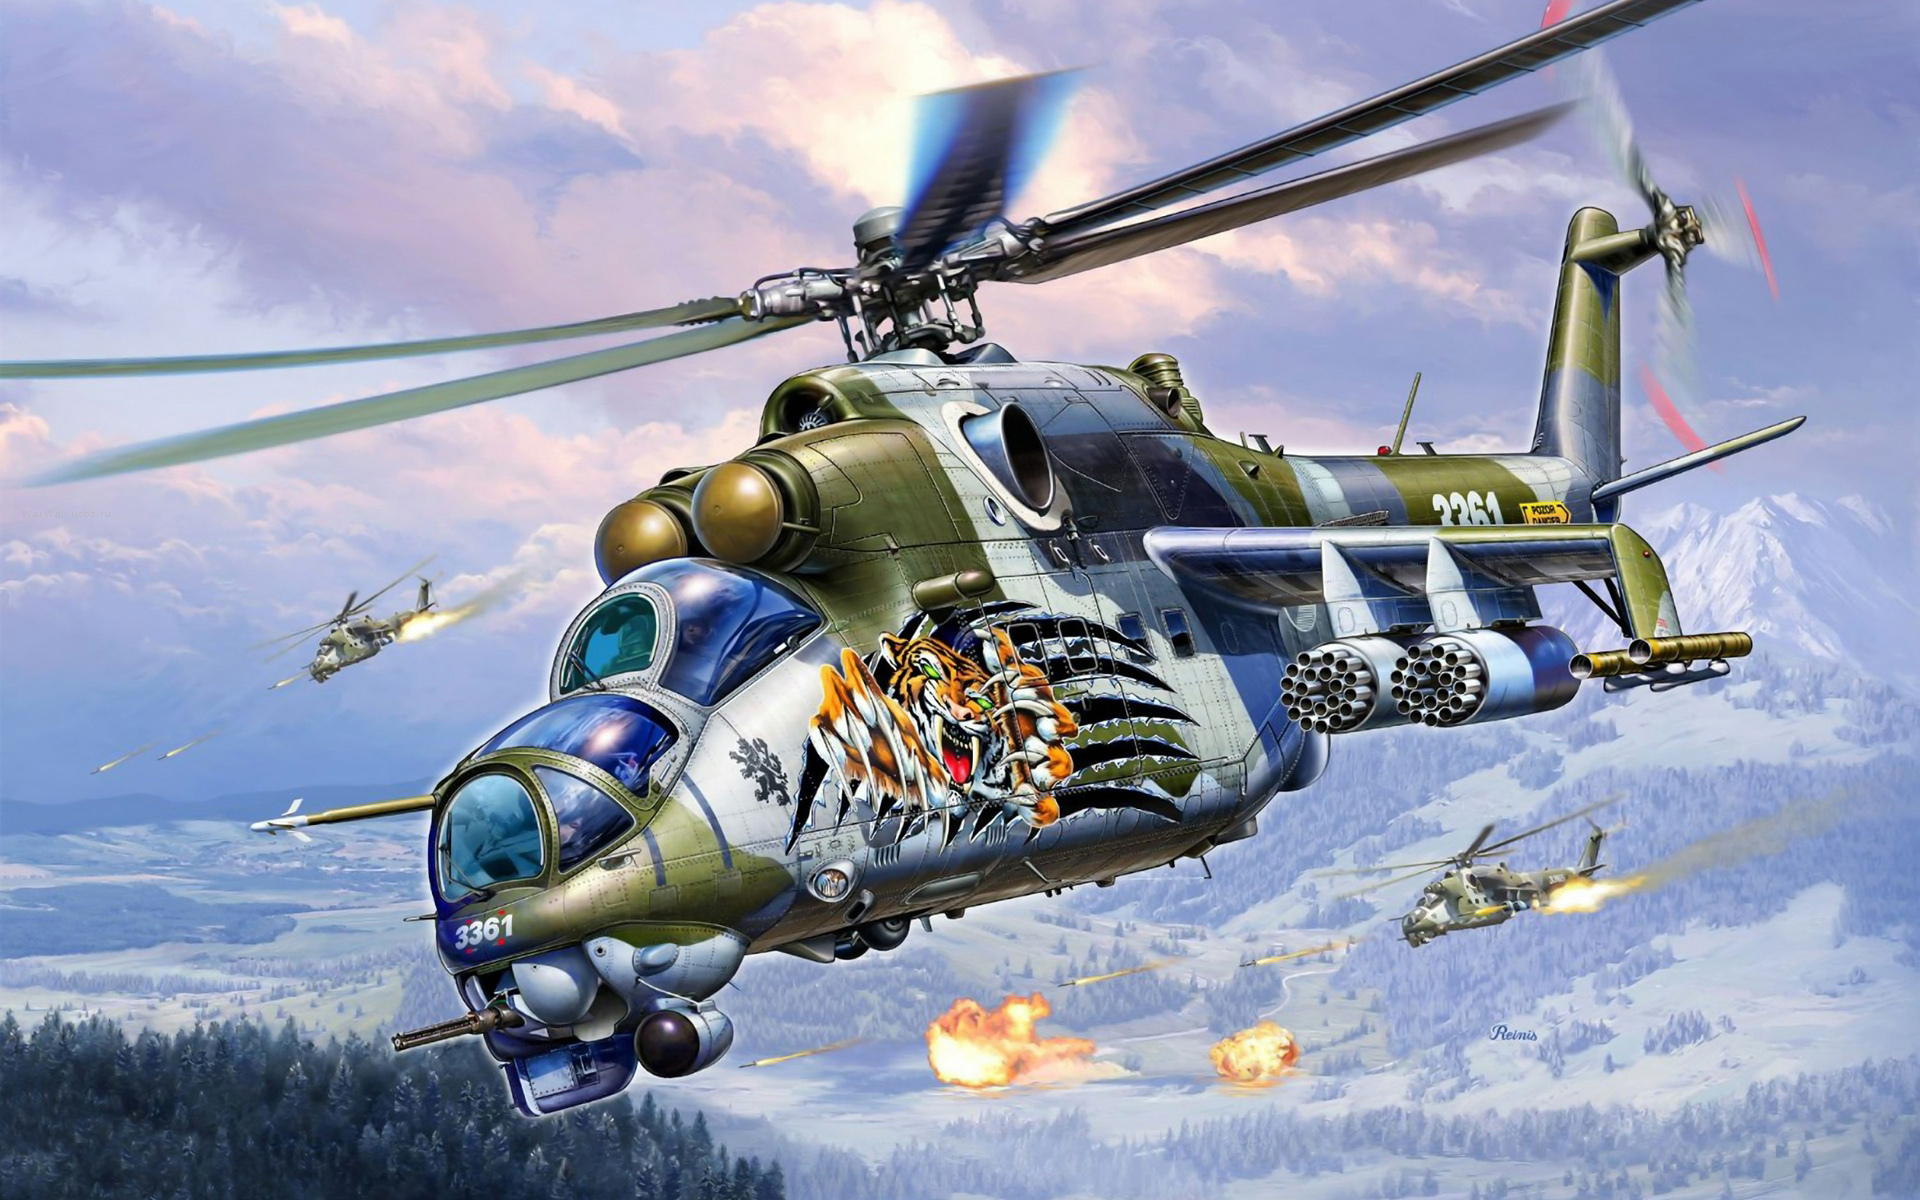 Soviet Russian Transport Military Helicopter Wallpaper Background